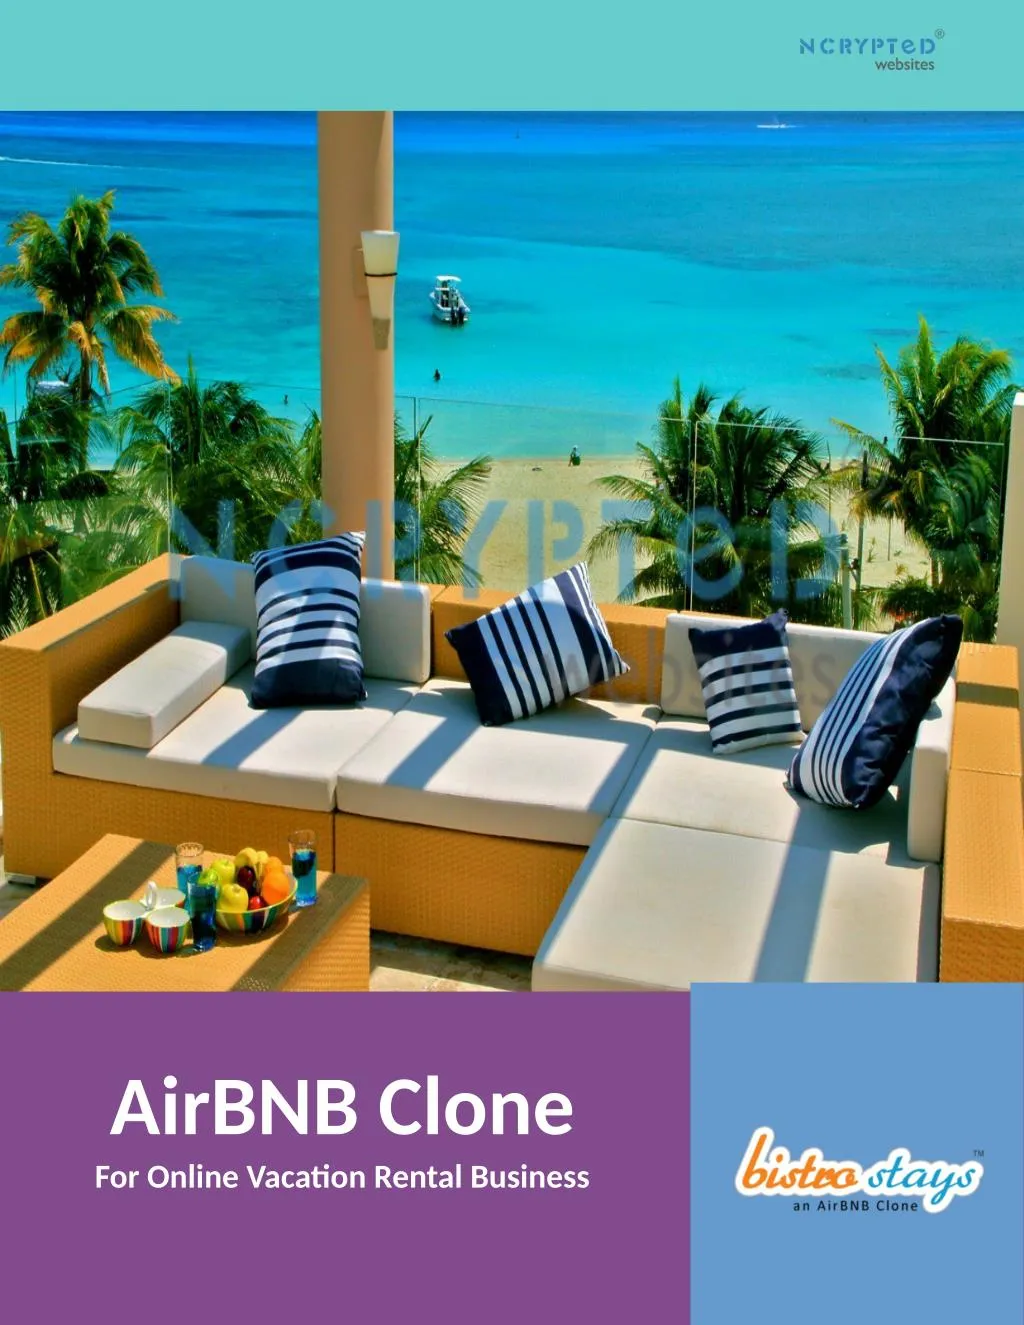 airbnb clone for online vacation rental business